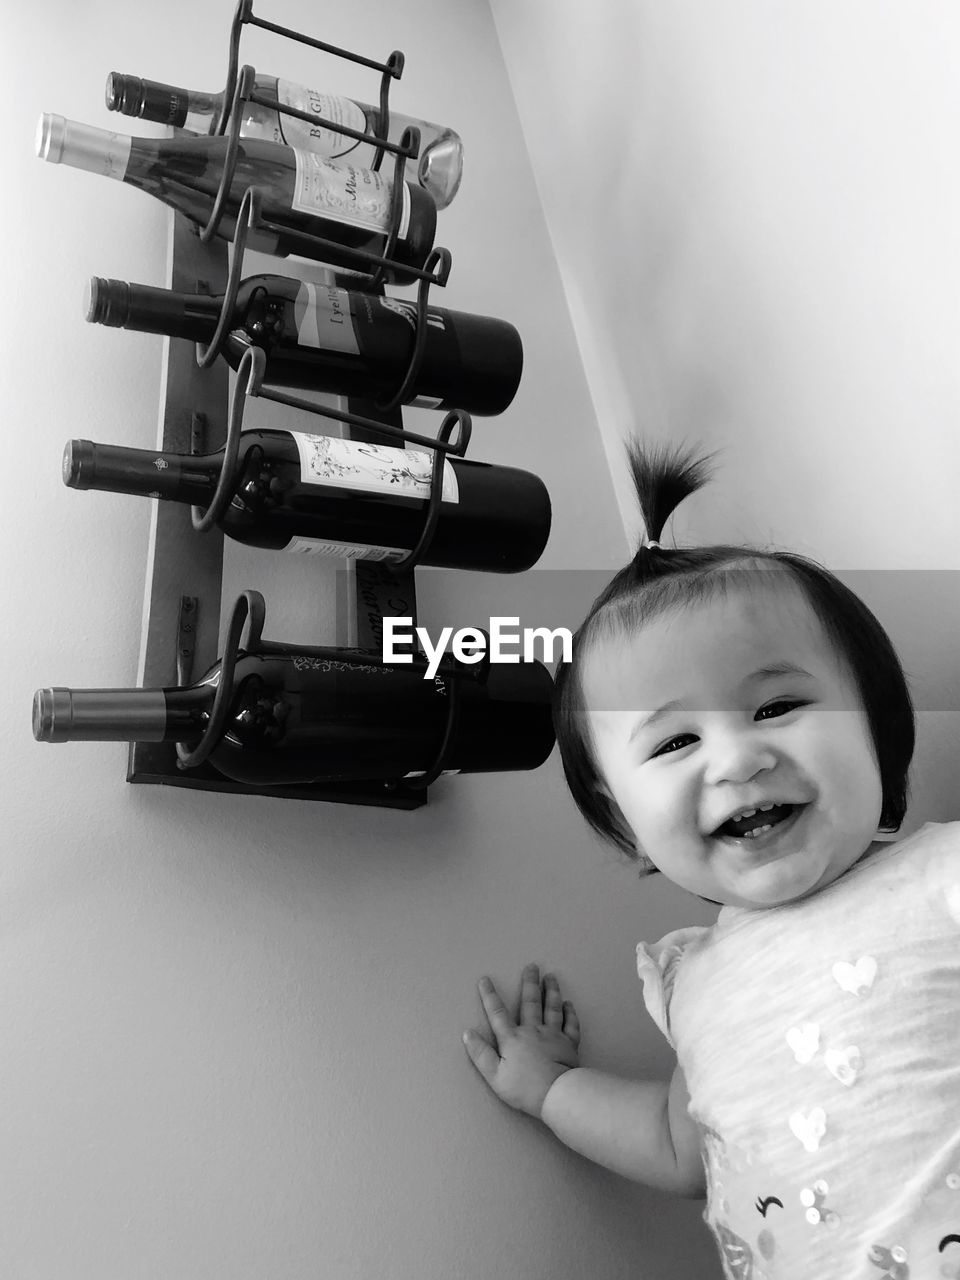 Portrait of smiling girl standing by wine bottles in rack on wall